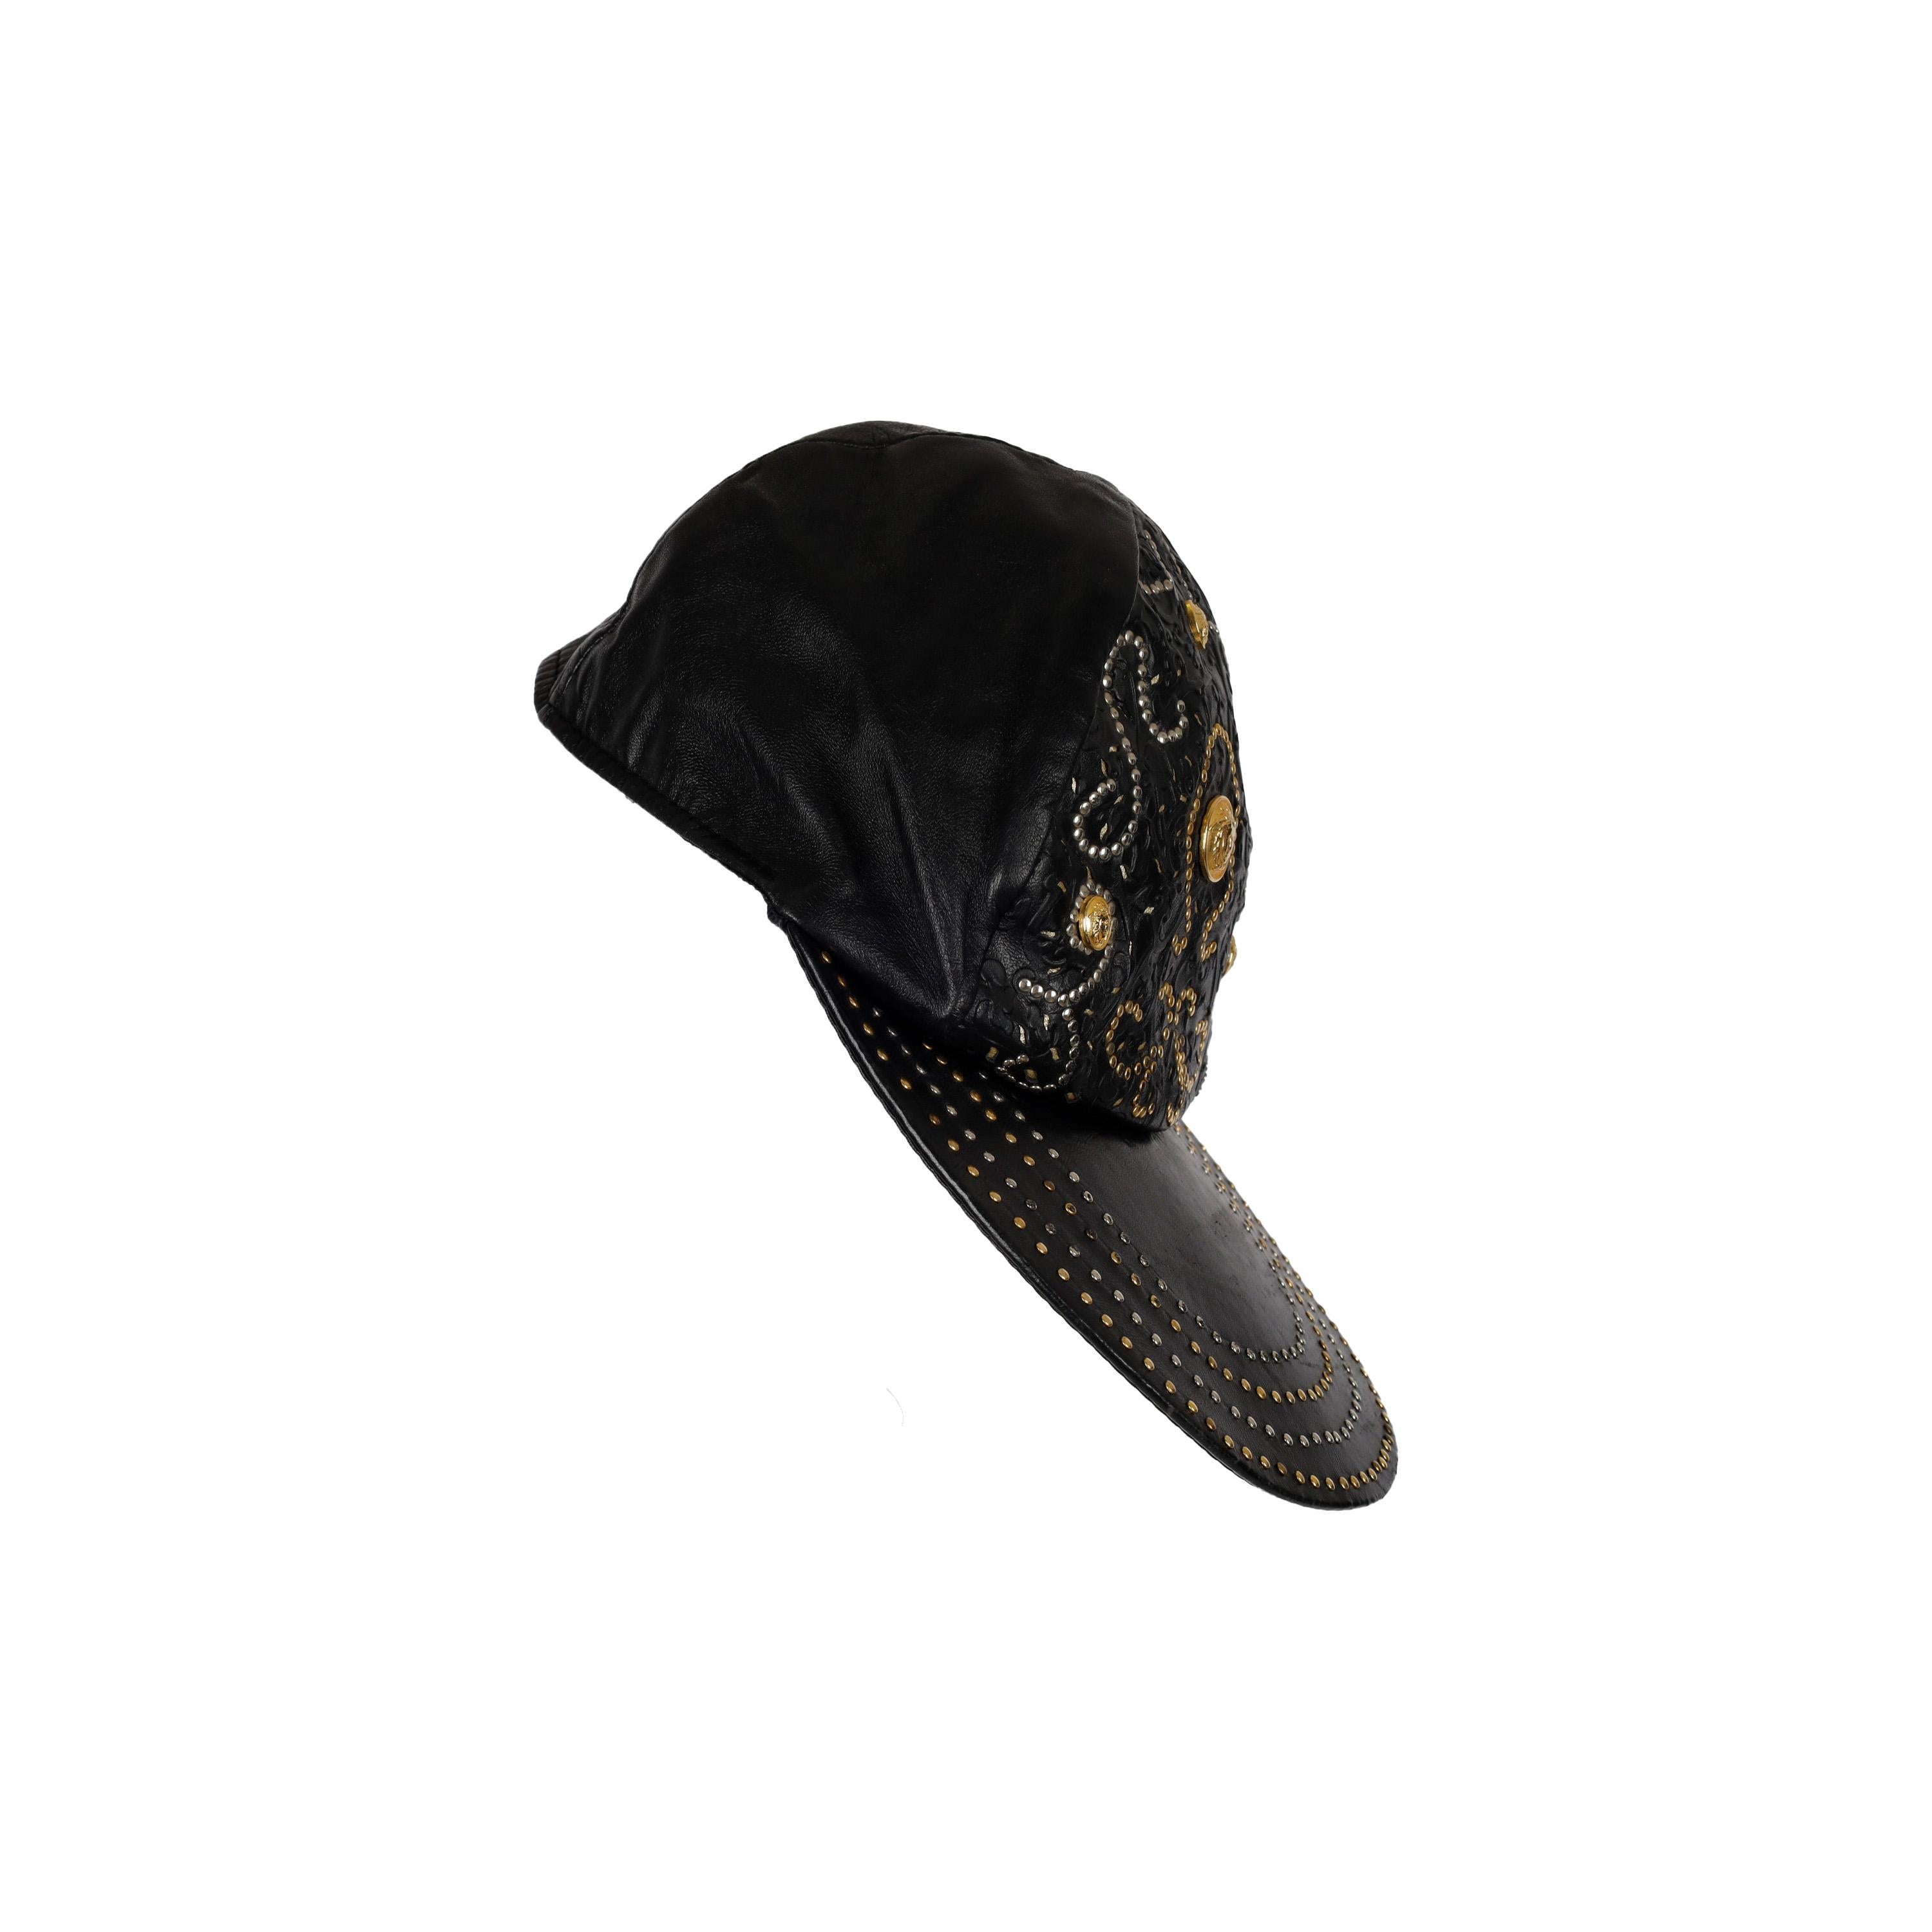 Gianni Versace Vintage Medusa Hat In Good Condition For Sale In Milano, IT